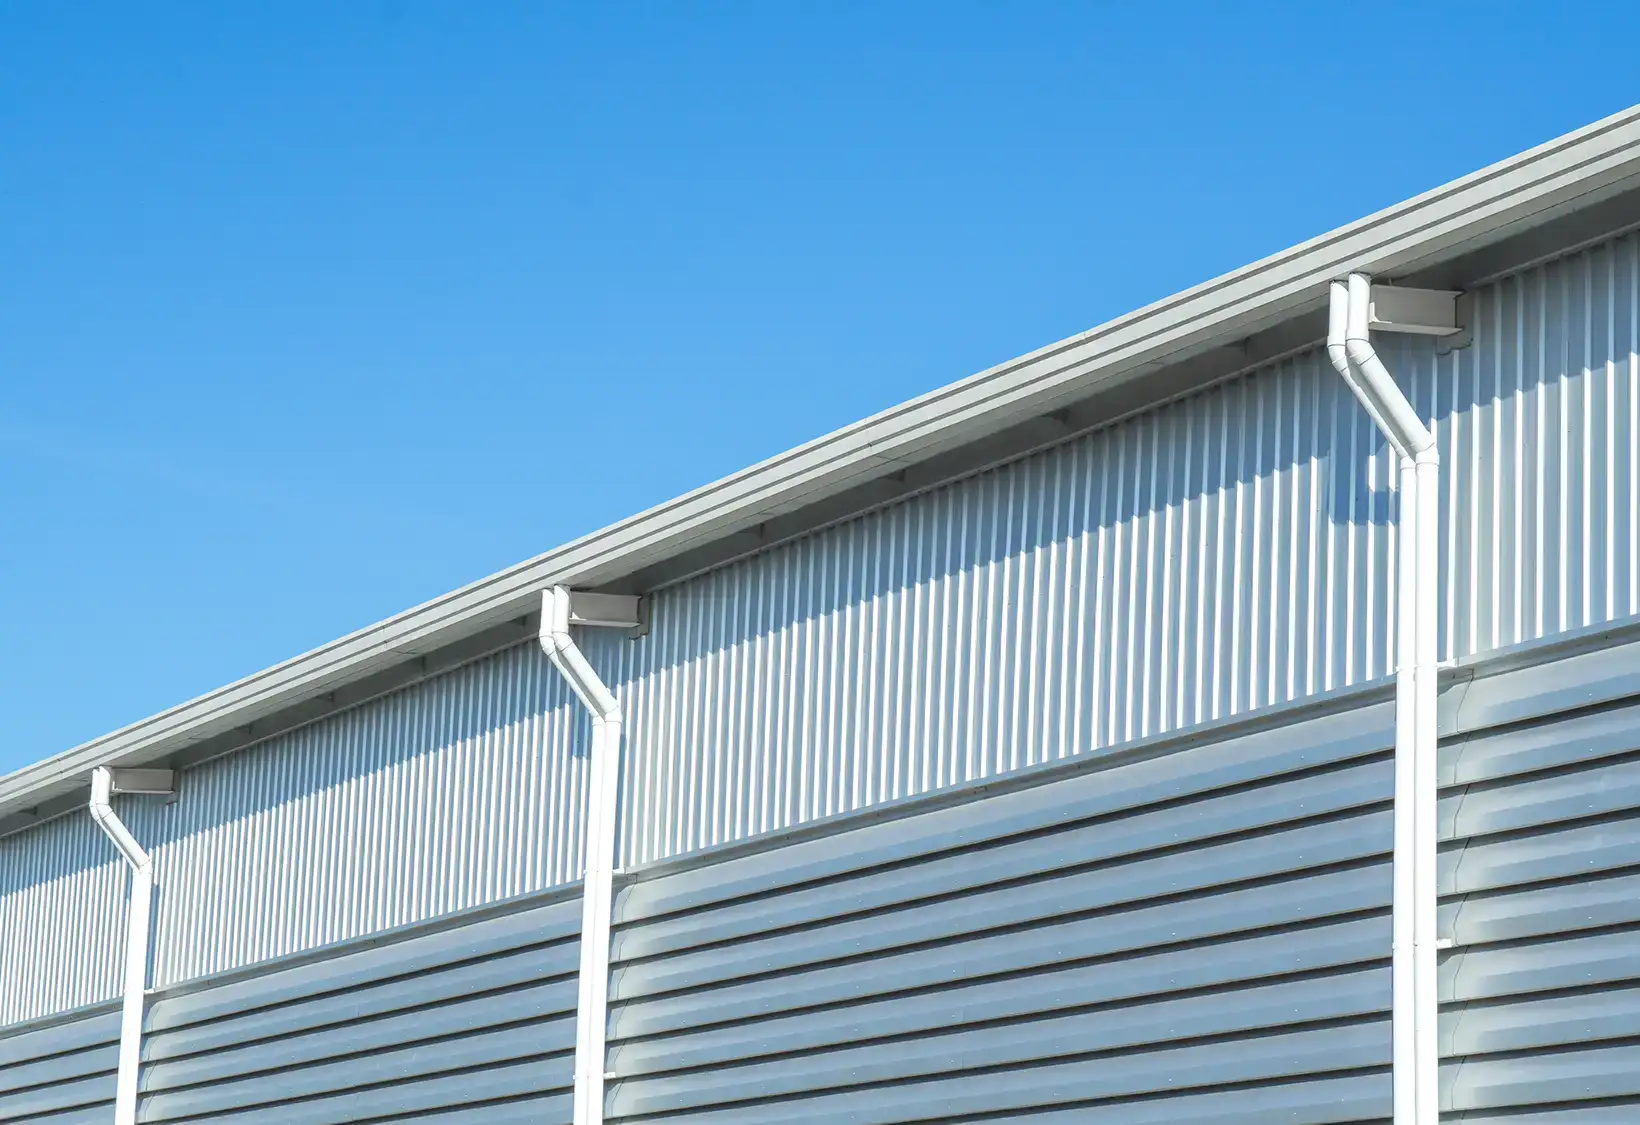 Commercial gutter system for large warehouse - Highland, IL